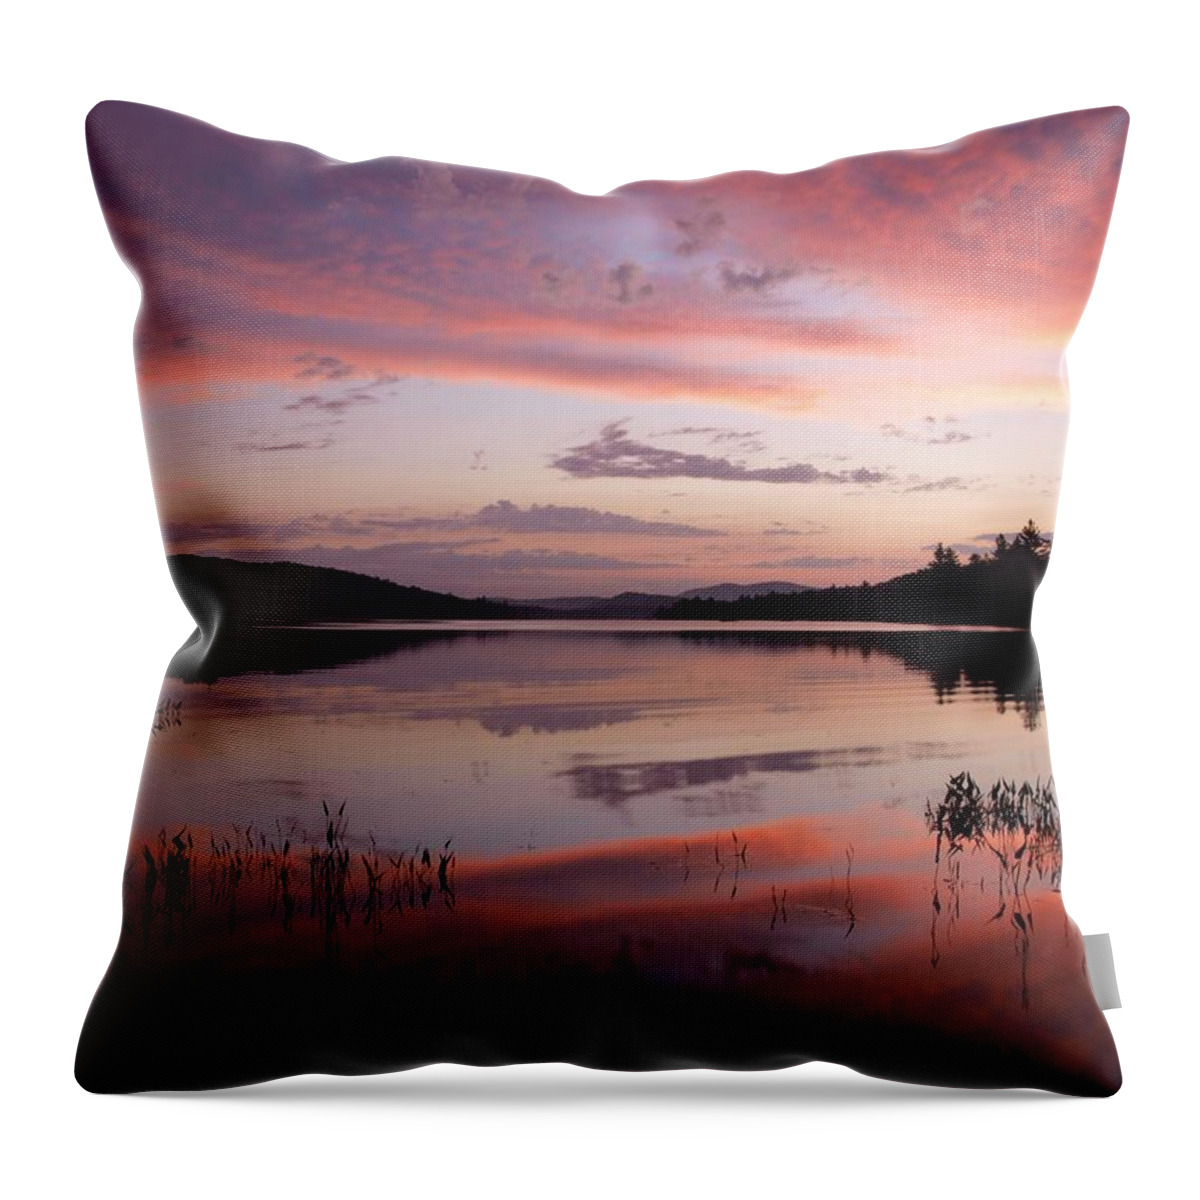 Adirondack Throw Pillow featuring the photograph Adirondack Reflections 1 by Joshua House